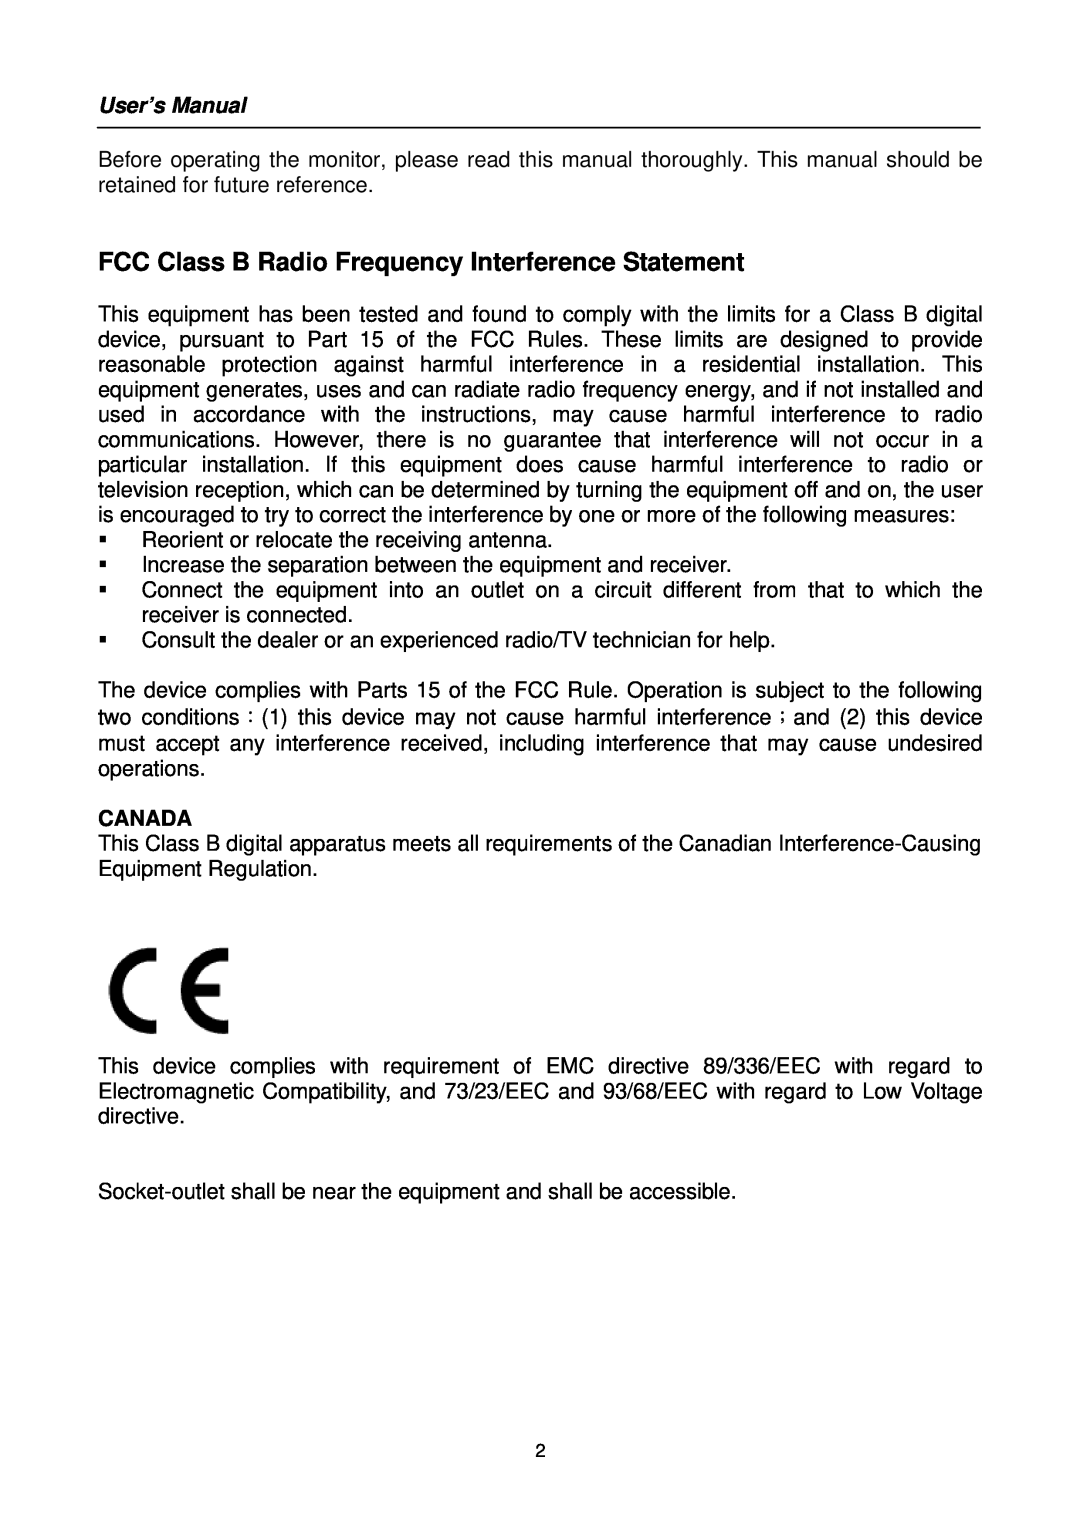 Hanns.G HS191 user manual FCC Class B Radio Frequency Interference Statement, User’s Manual, Canada 